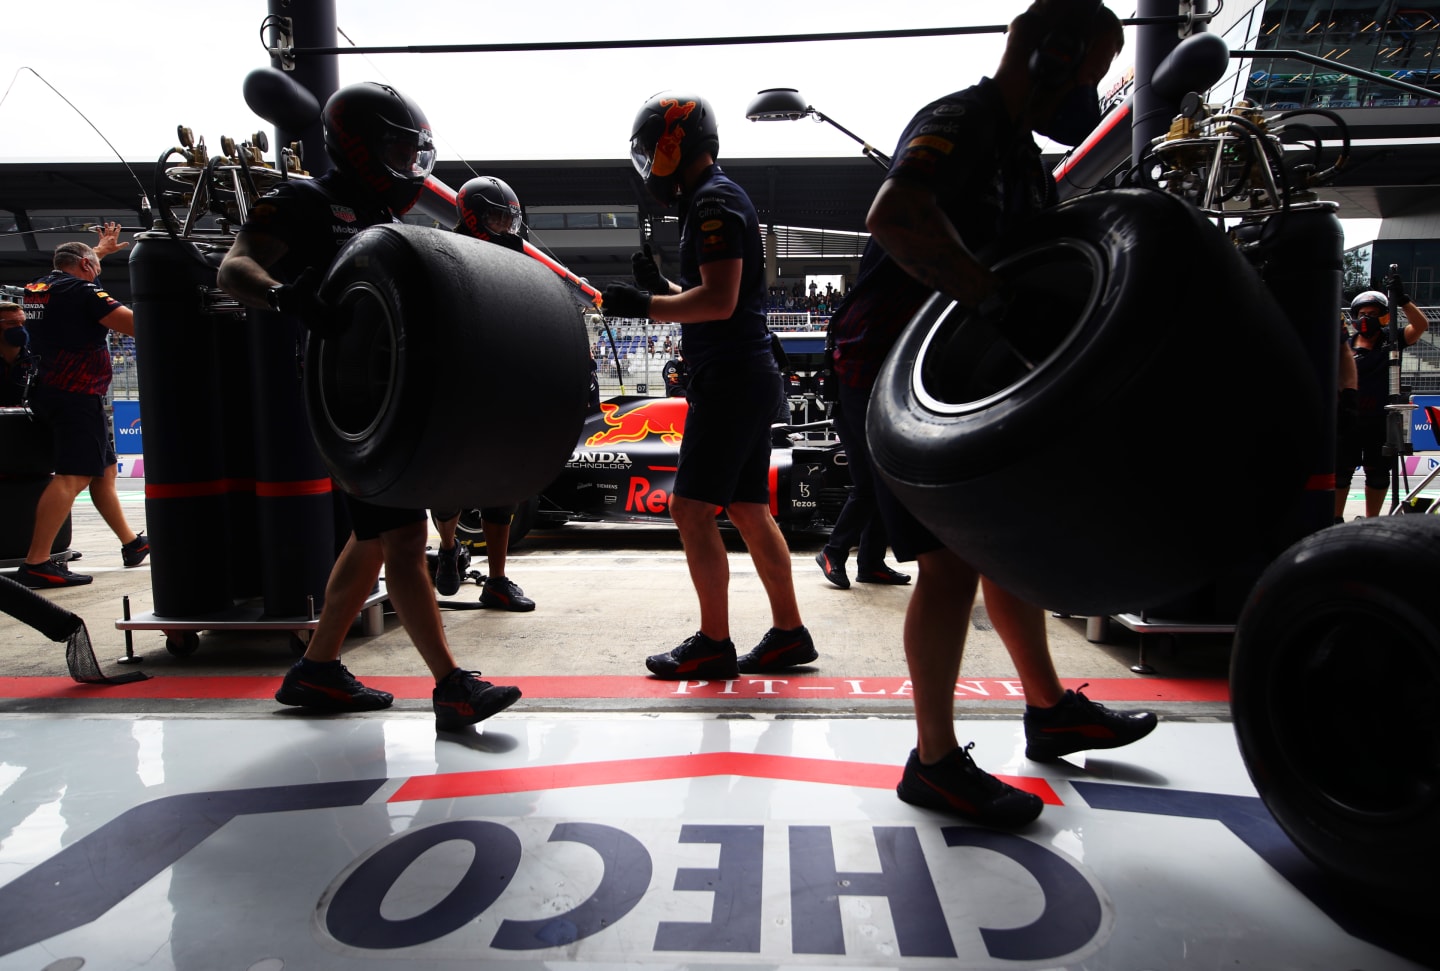 SPIELBERG, AUSTRIA - JULY 02: The Red Bull Racing team work in the garage during practice ahead of the F1 Grand Prix of Austria at Red Bull Ring on July 02, 2021 in Spielberg, Austria. (Photo by Mark Thompson/Getty Images)